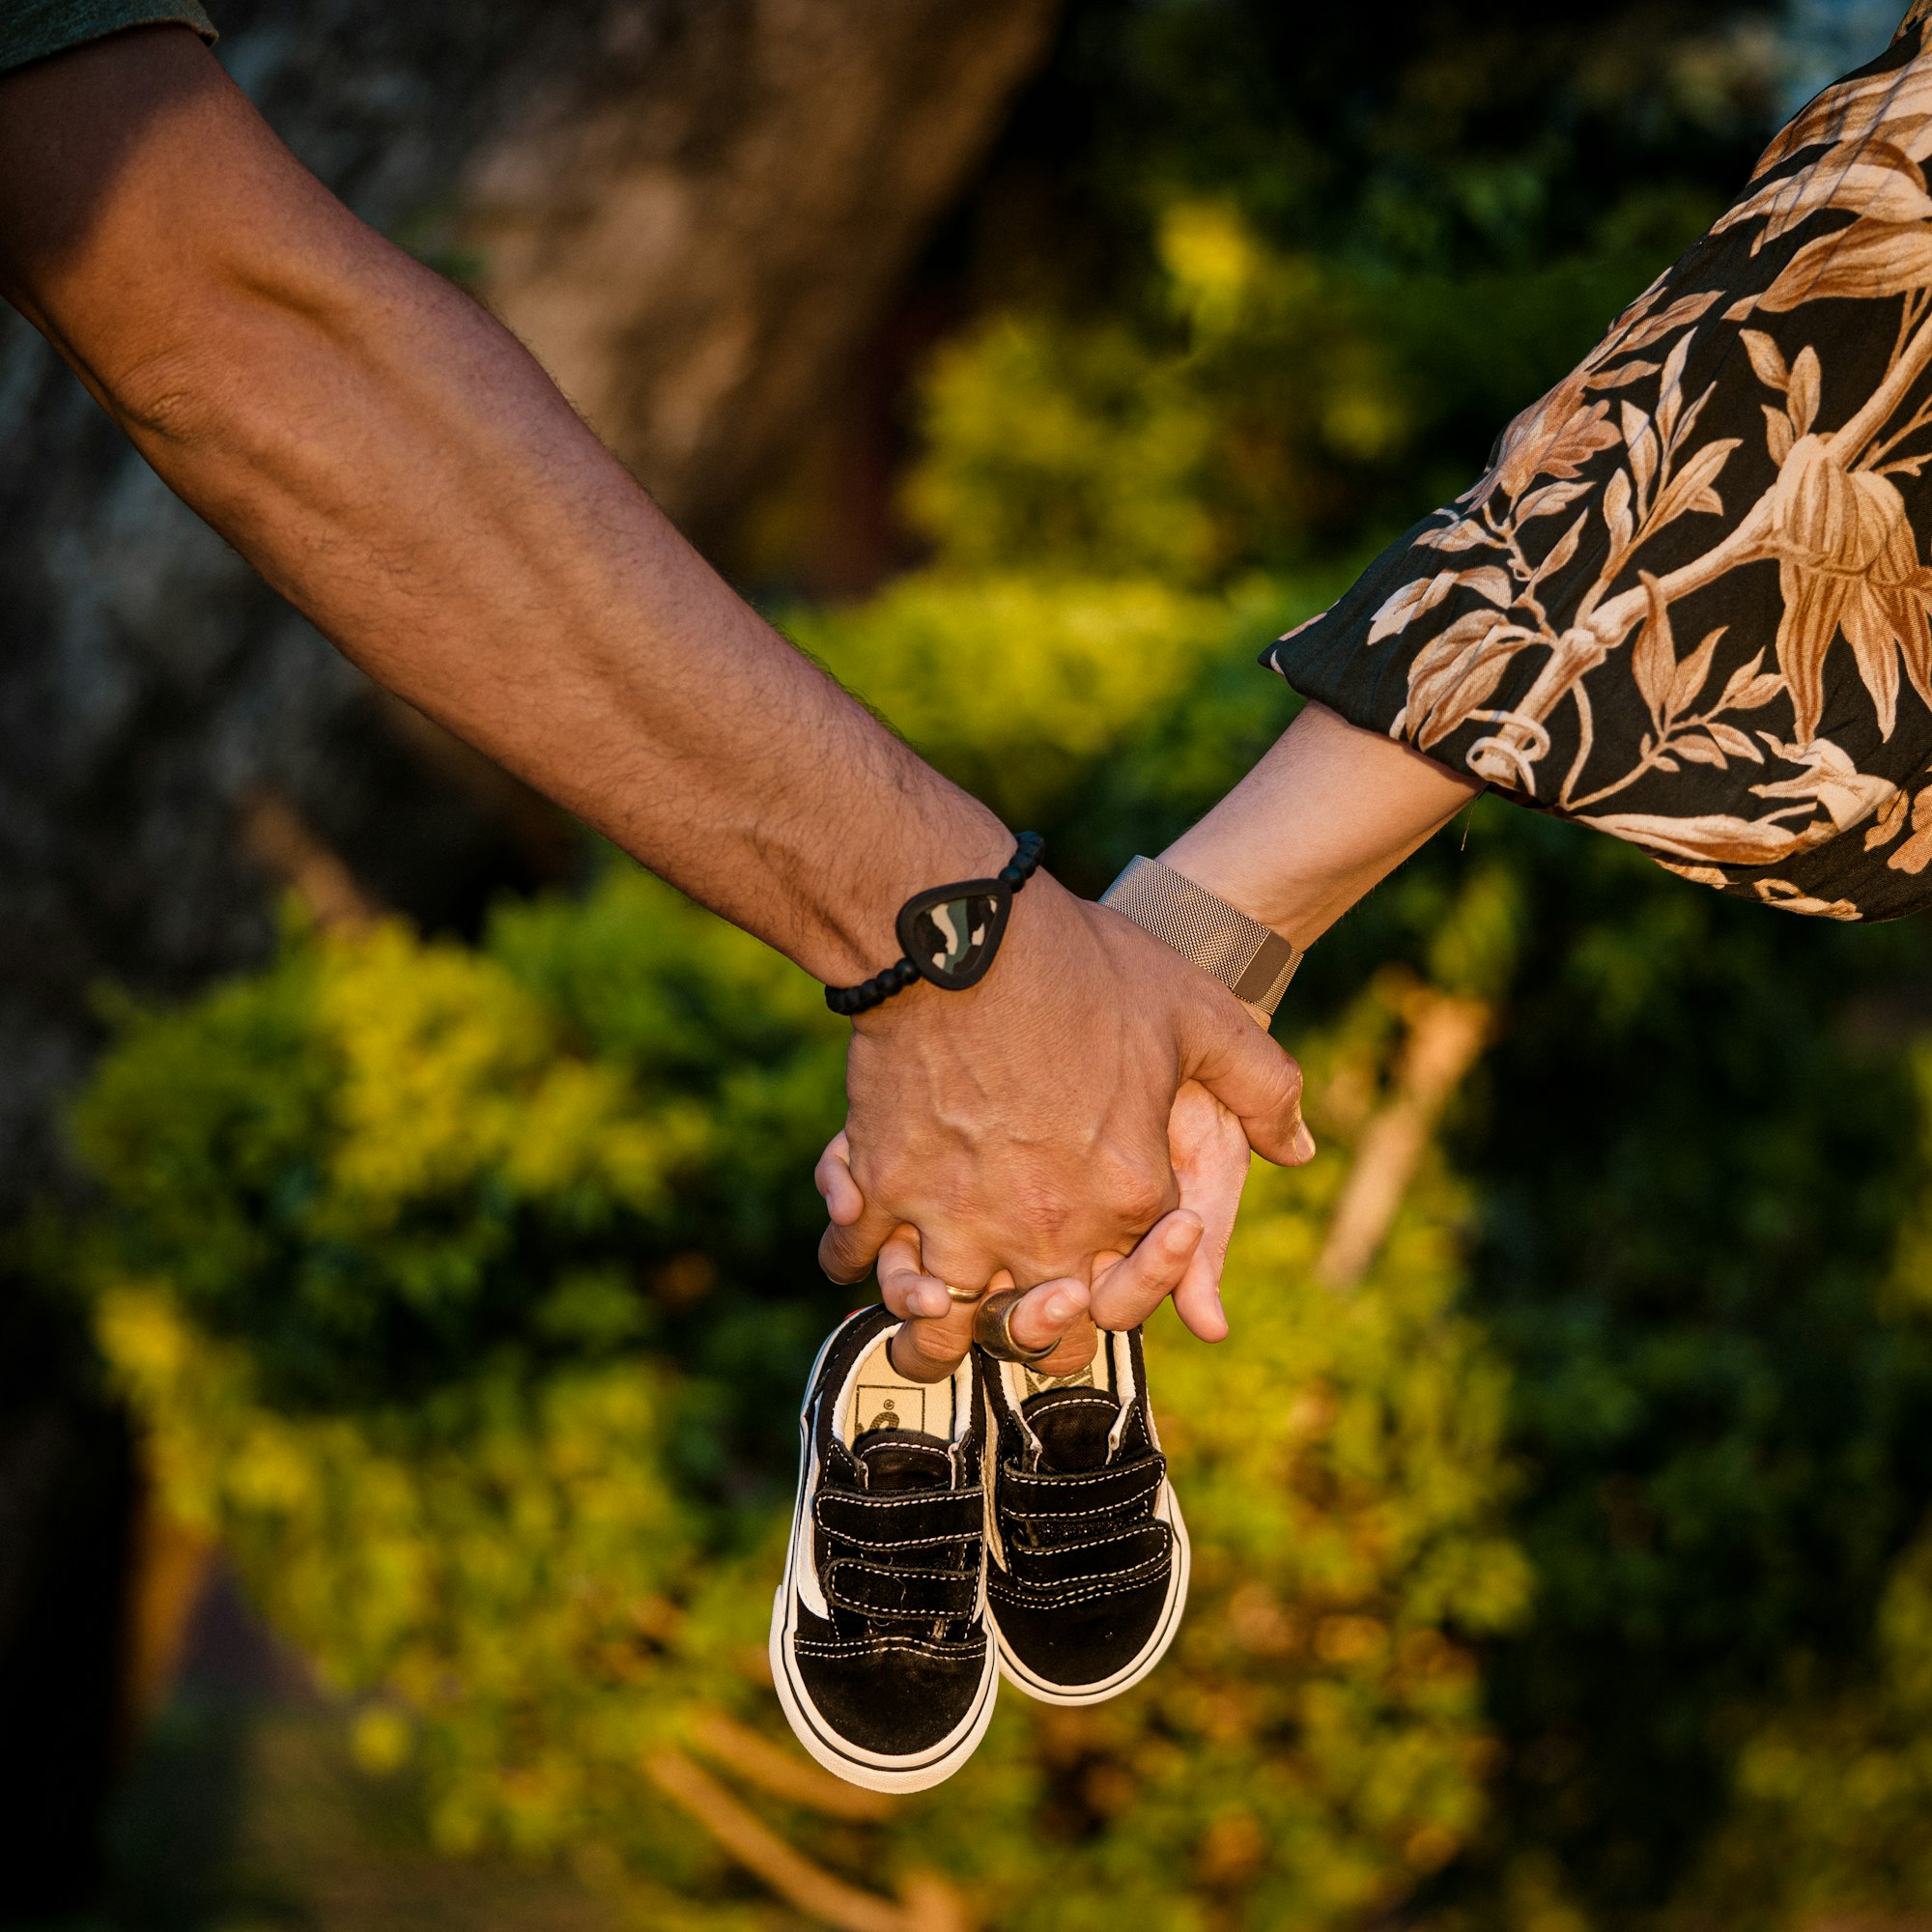 parents holding hands holding baby shoes on a sunny sunset